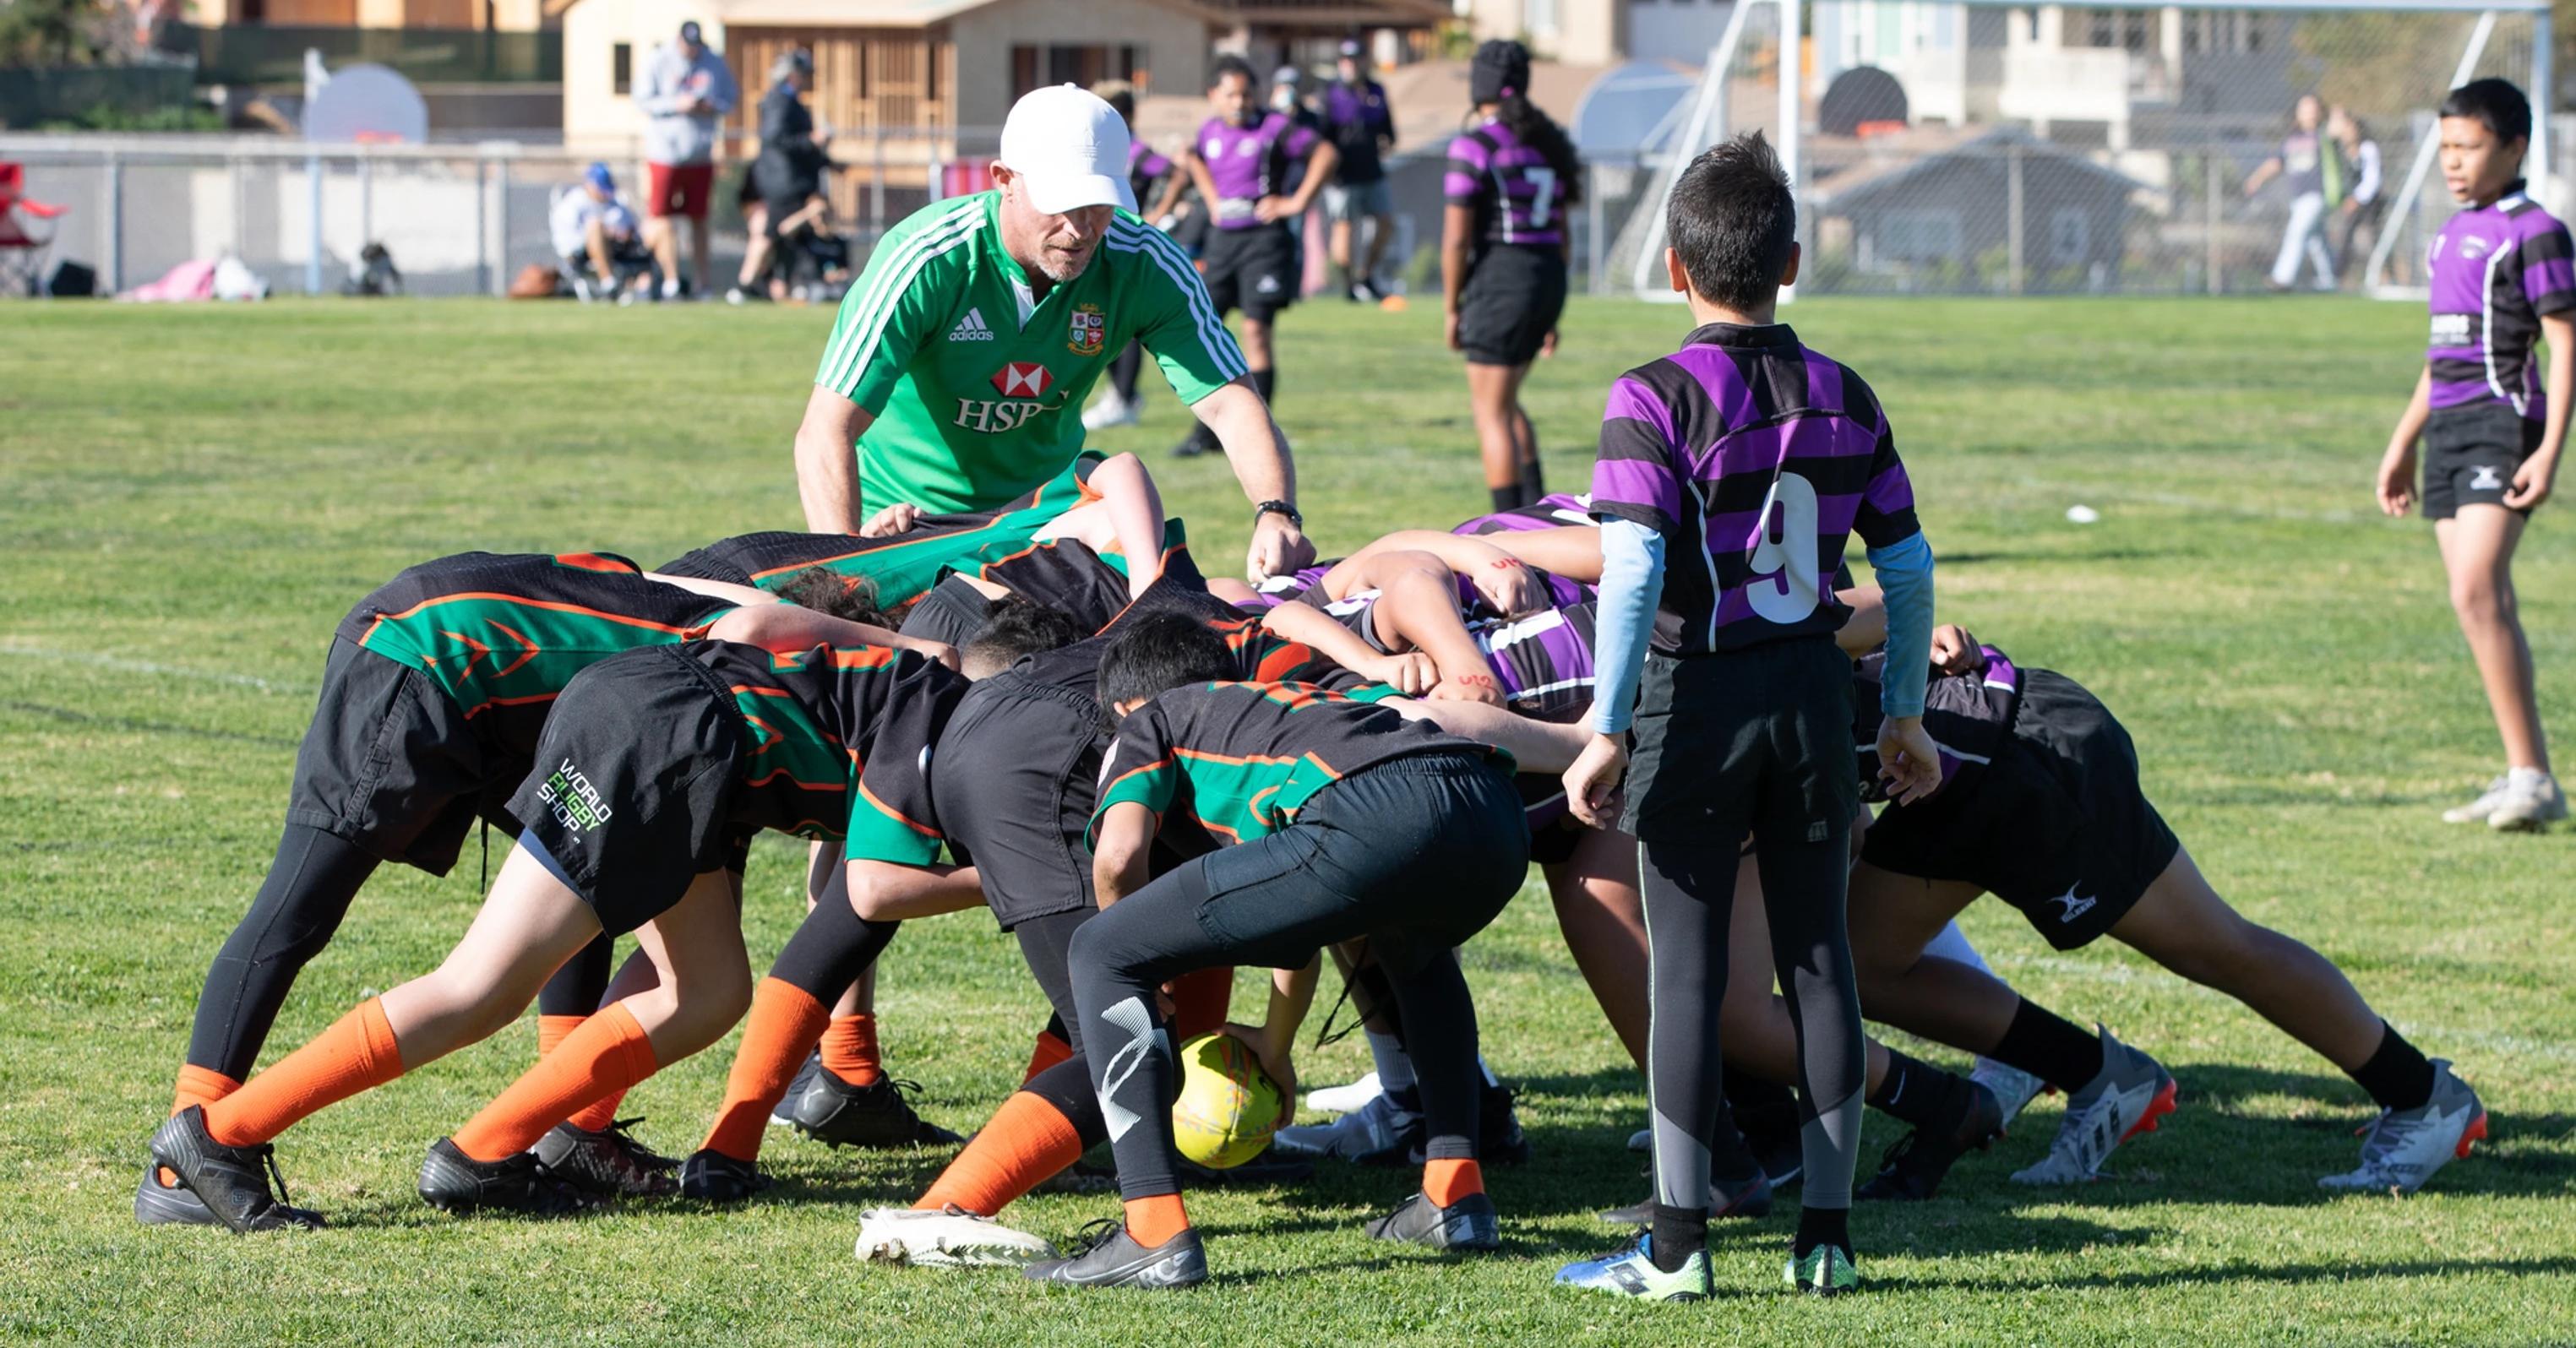 Help support the Mountain Lions Rugby Club